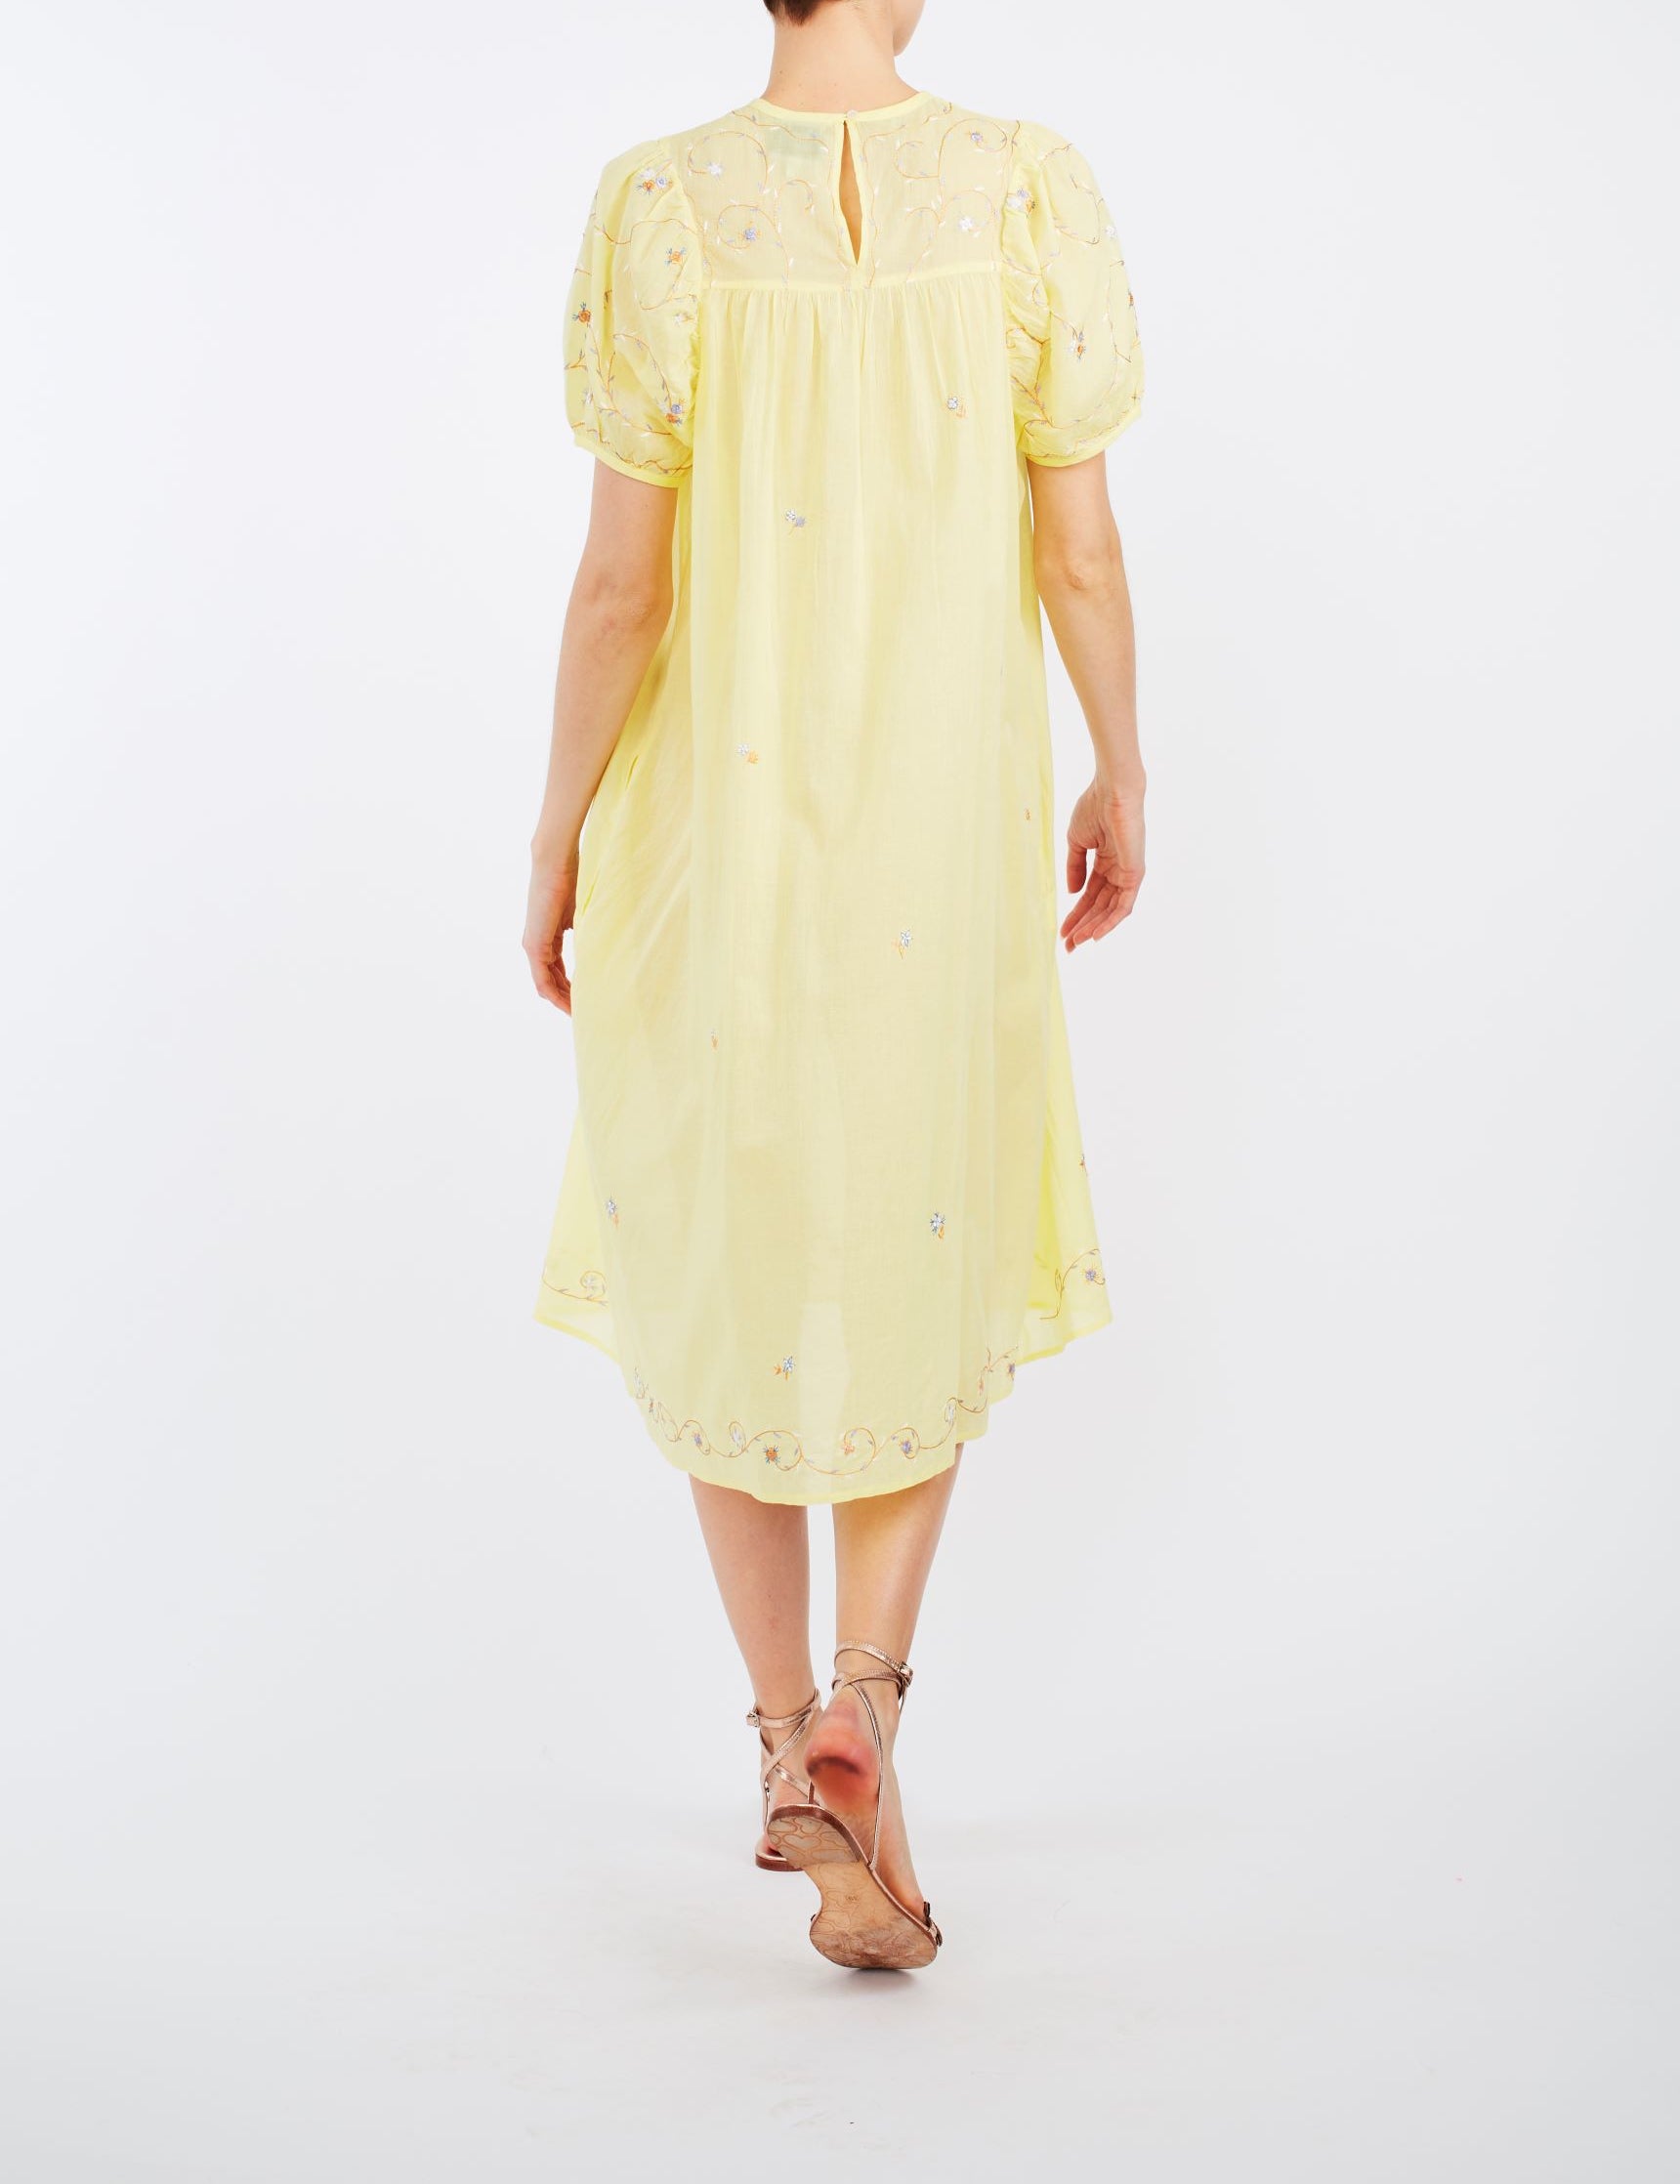 Back view of Olympia Sweet Lemon cotton Dress by Thierry Colson